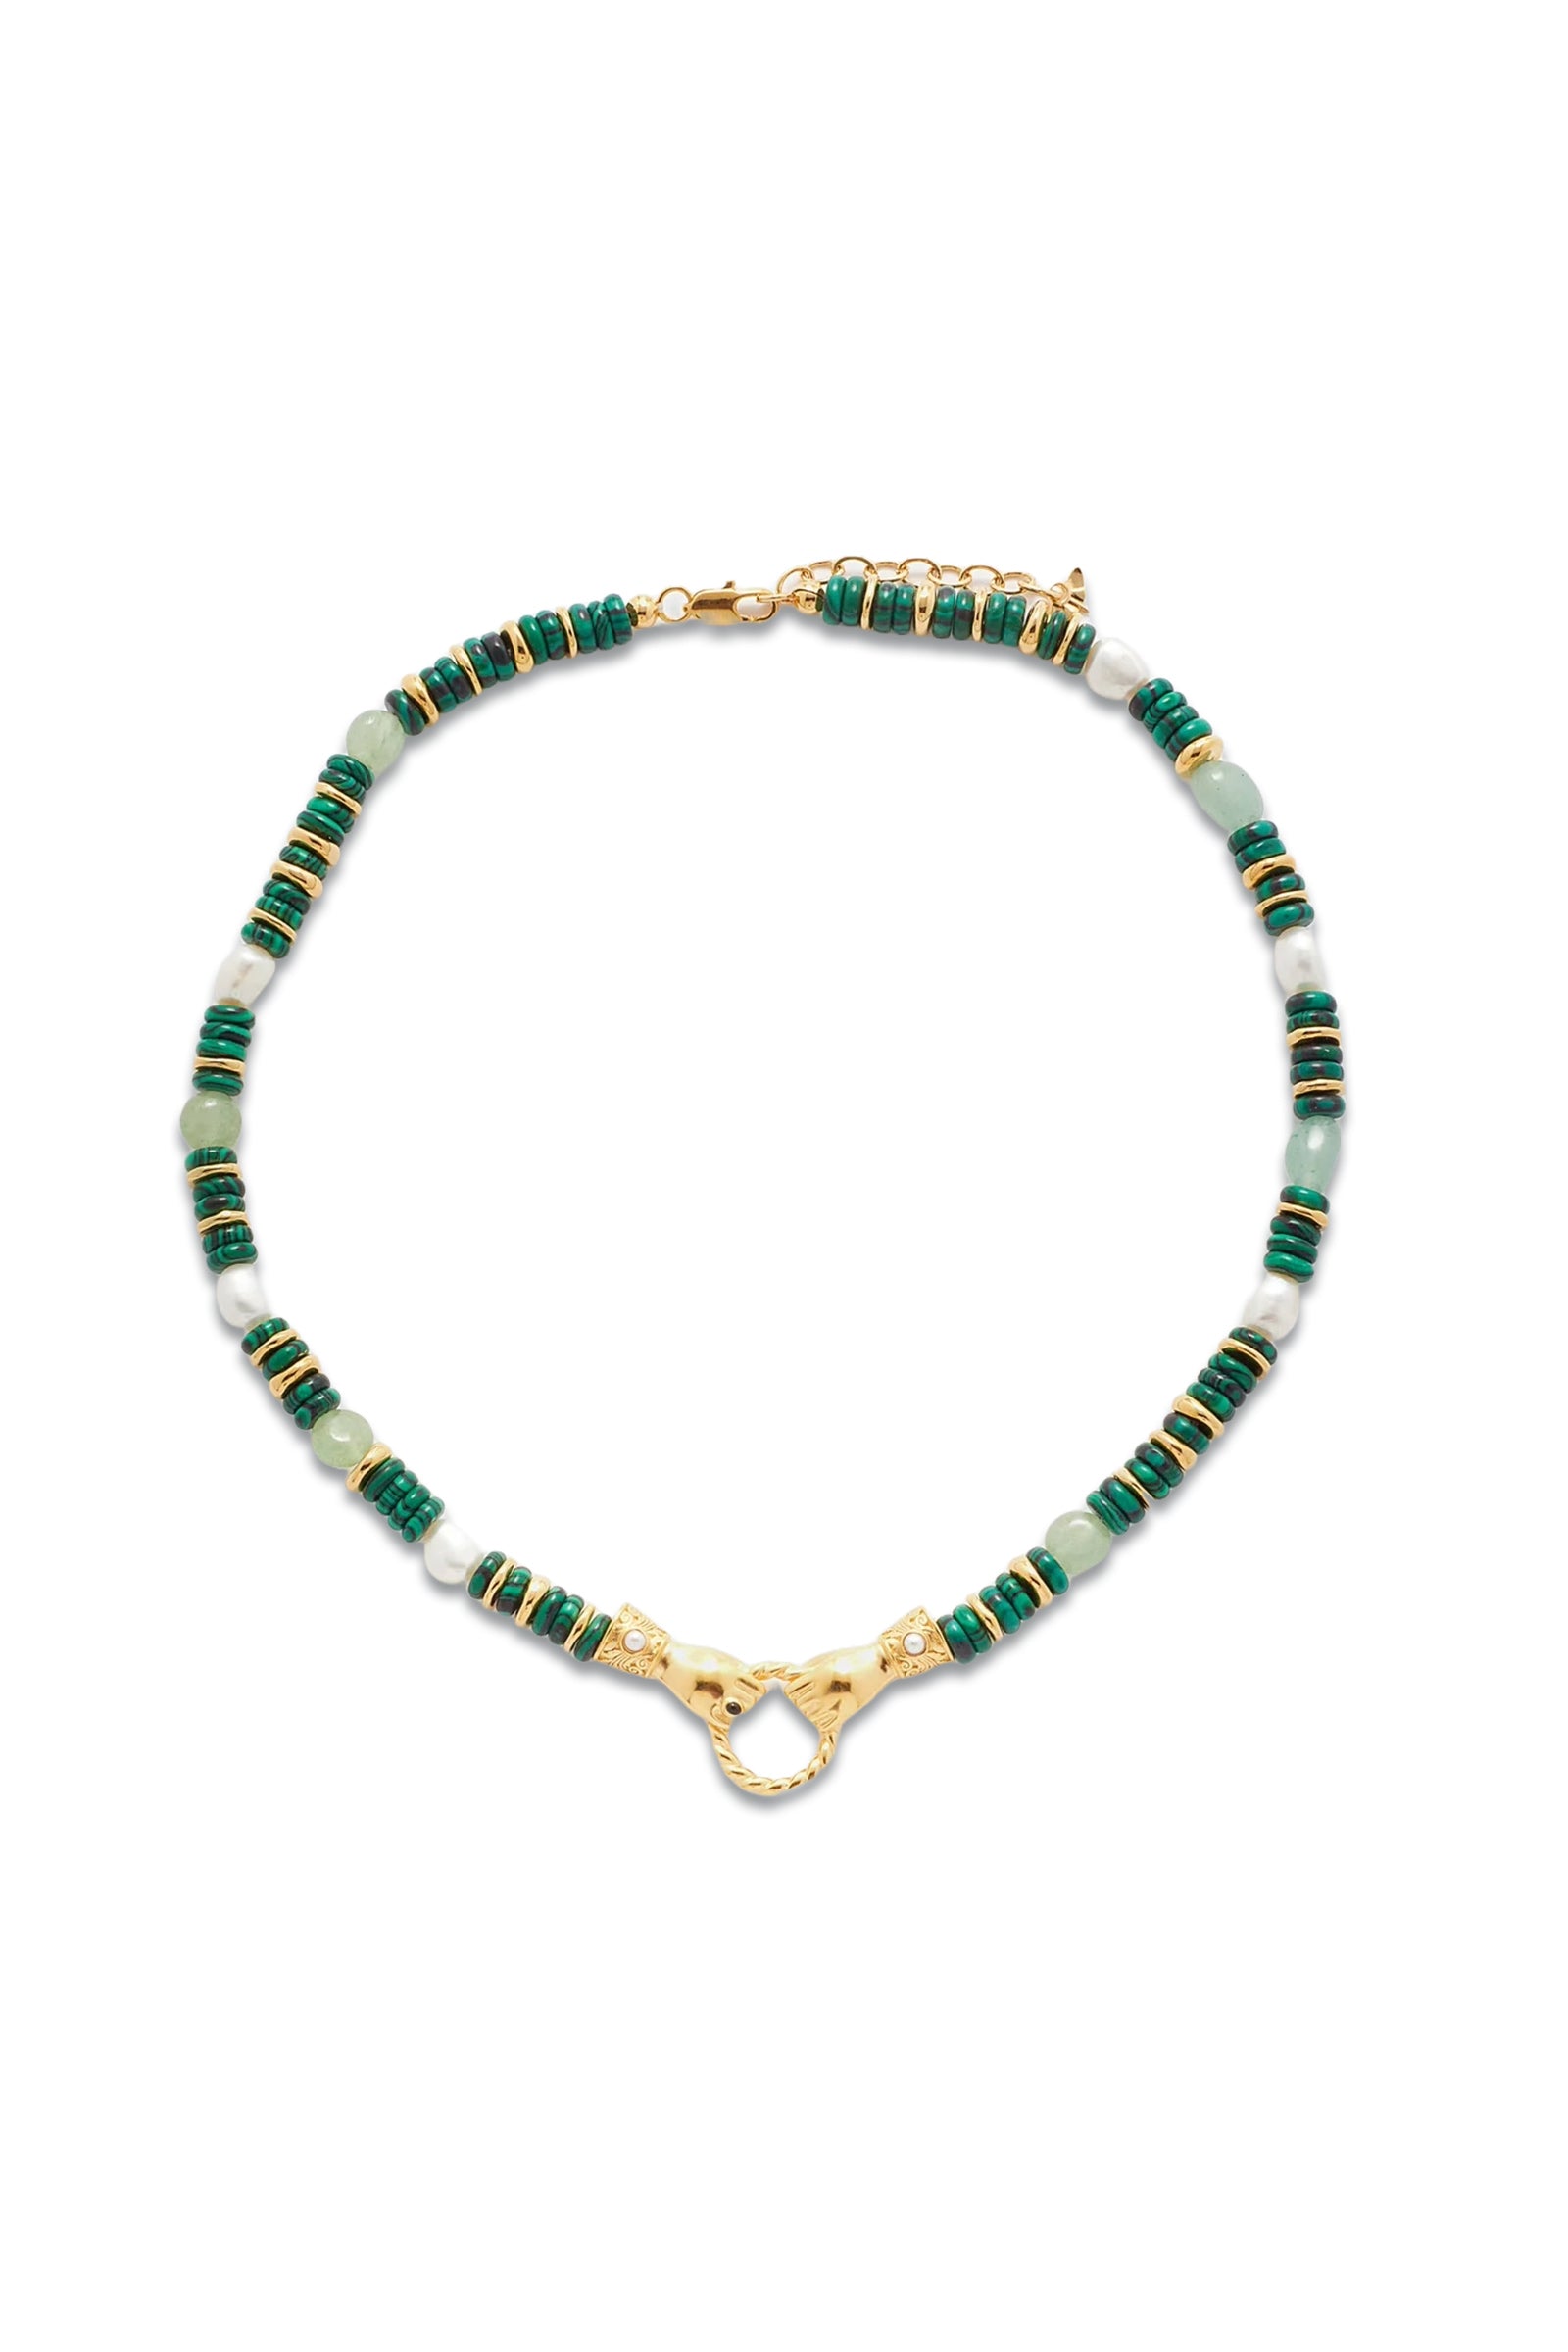 Missoma Harris Reed in Good Hands Beaded Gemstone Necklace | 18ct Gold Plated/Multi Green Gemstone & Pearl